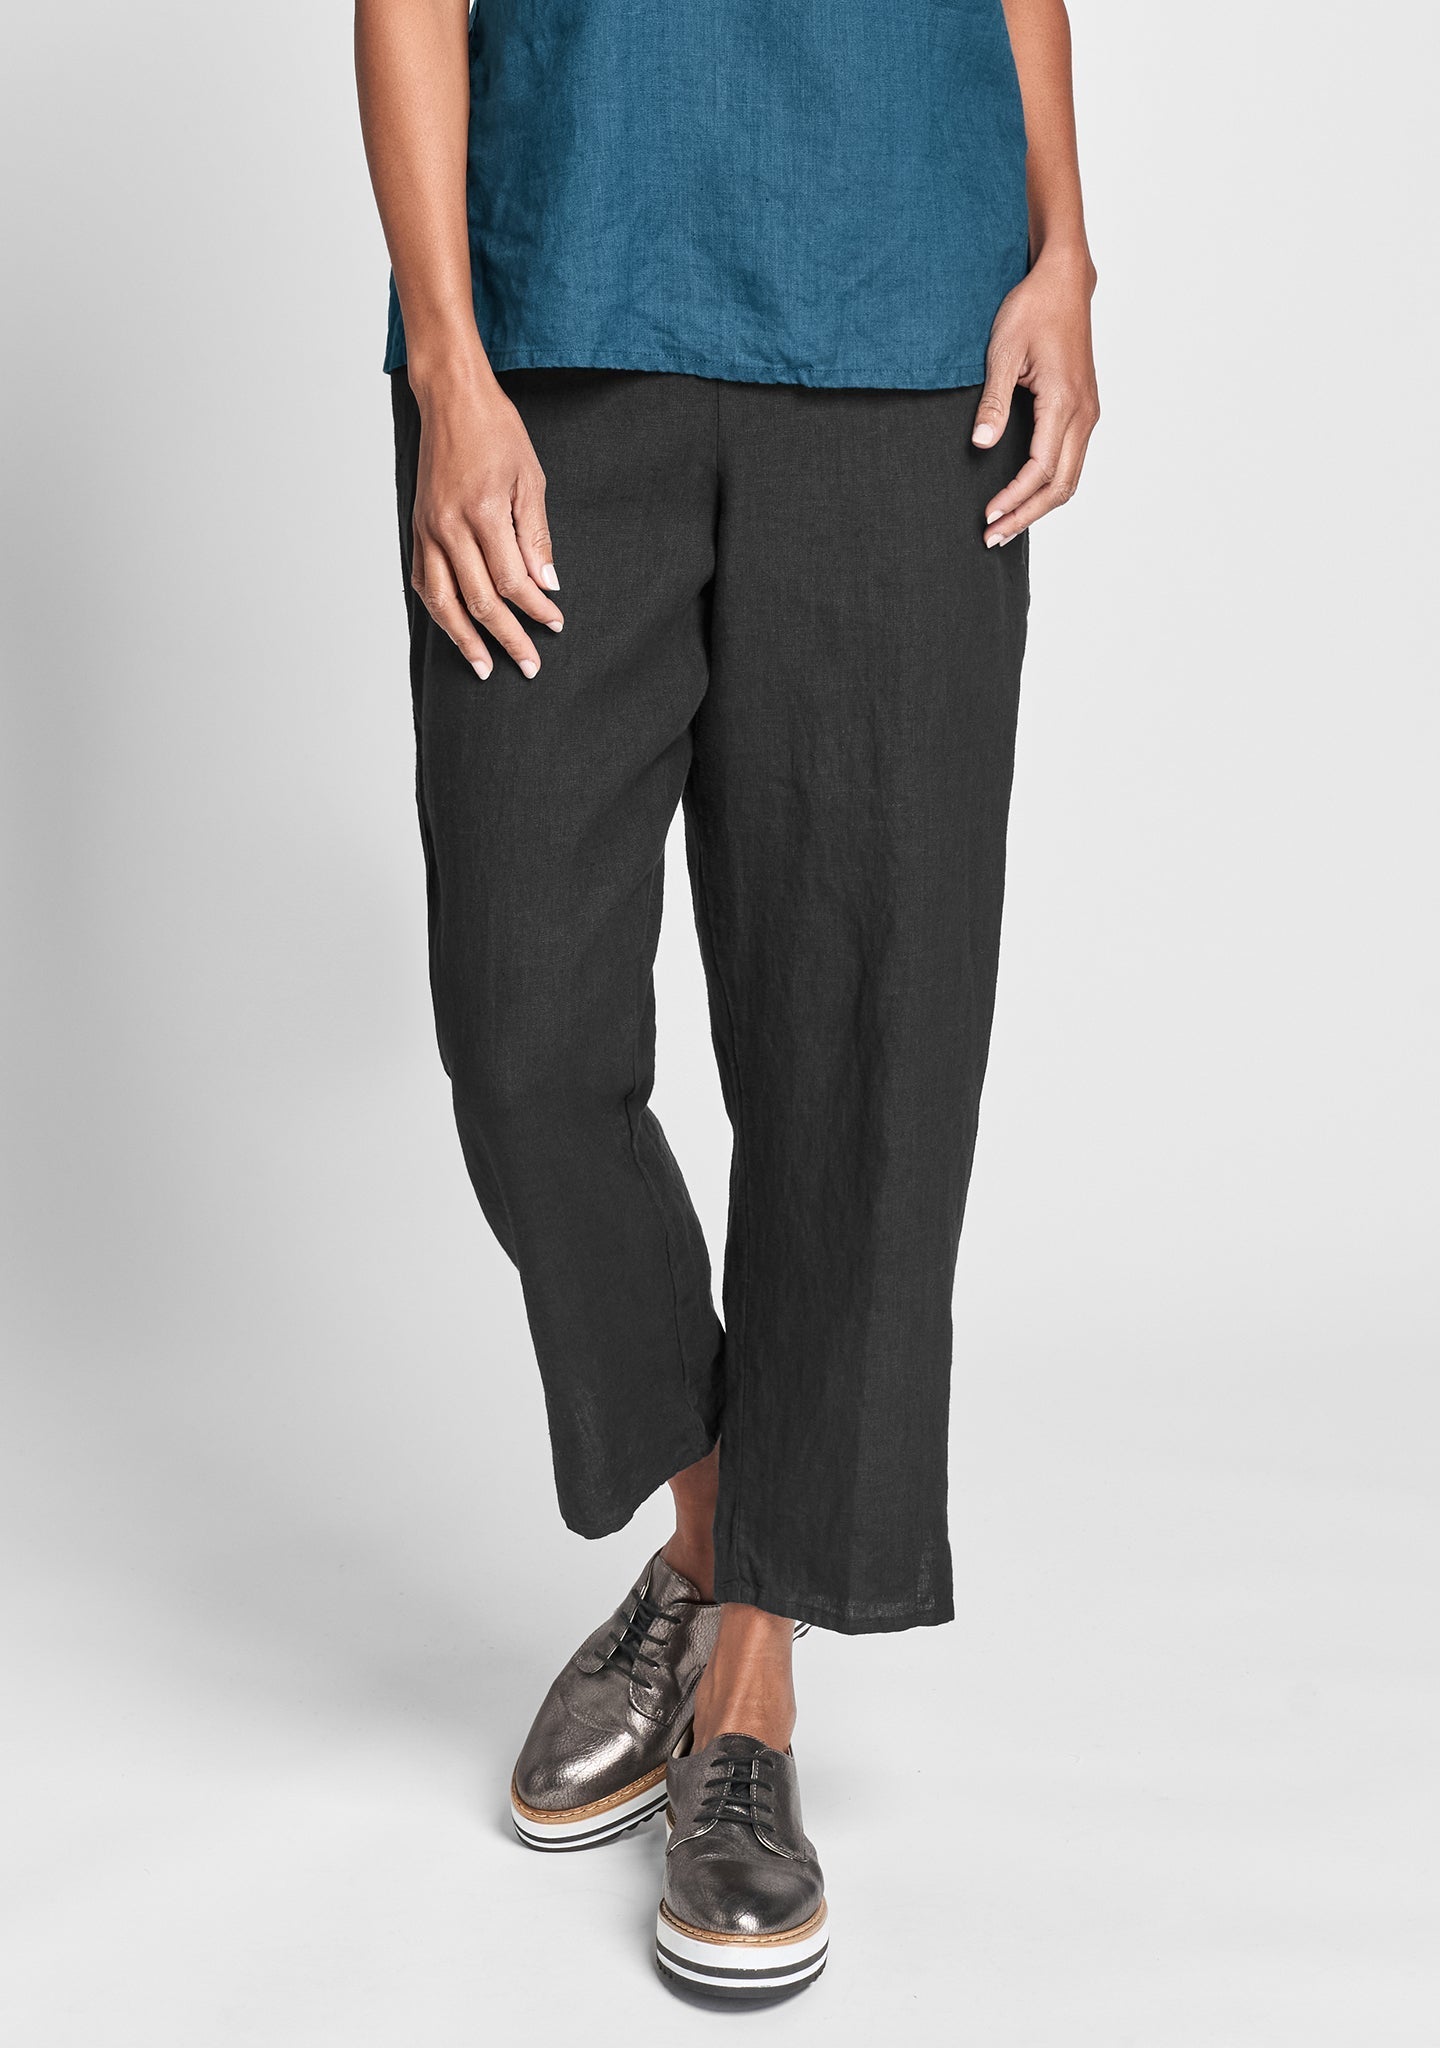 Pocketed Ankle Pant - Linen Pants